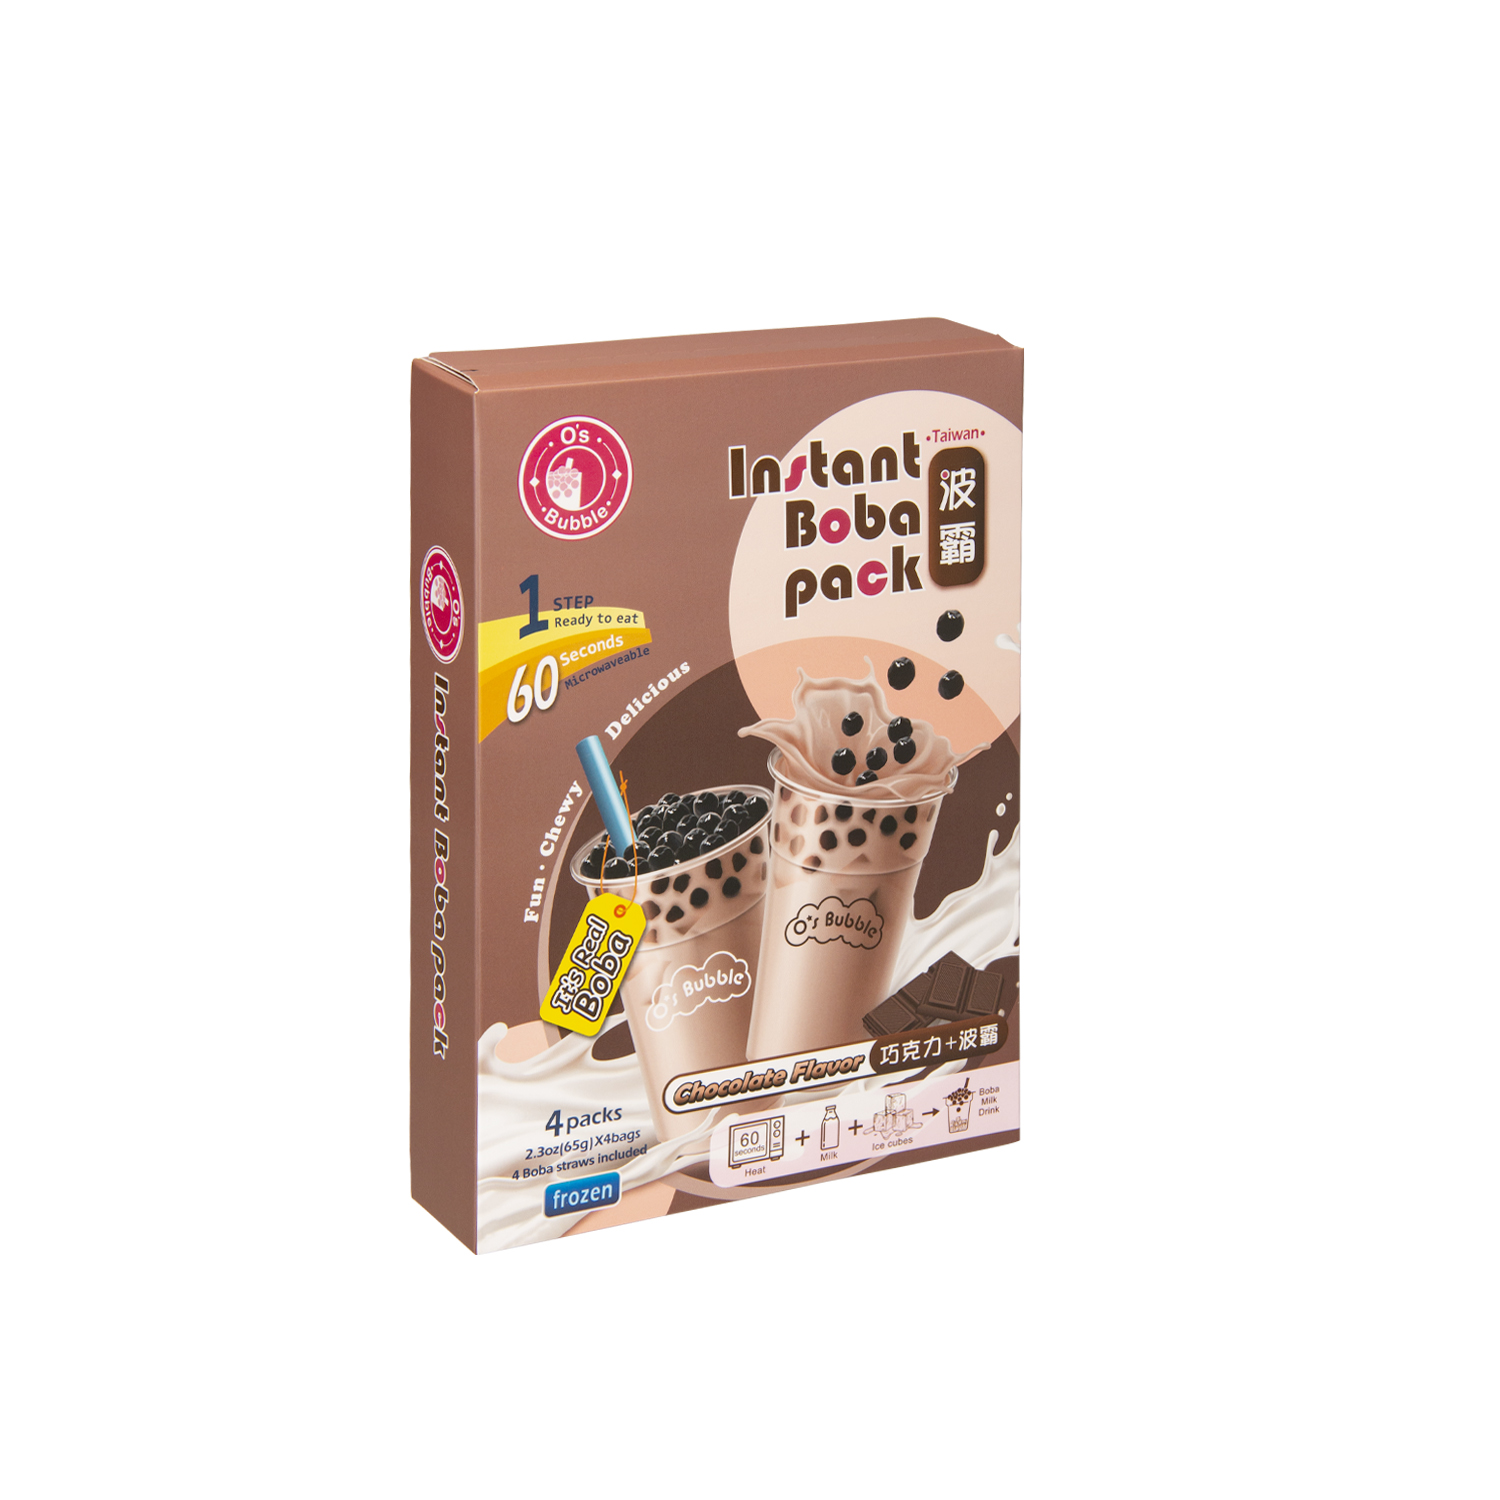  O's Bubble Boba Tea Kit - 6 Servings, All in One for Boba Tea  Lovers - Boba Party Kit for Boba Drinks - Boba Pearls Kit Includes Cups,  Straws, Stirrer, Brown